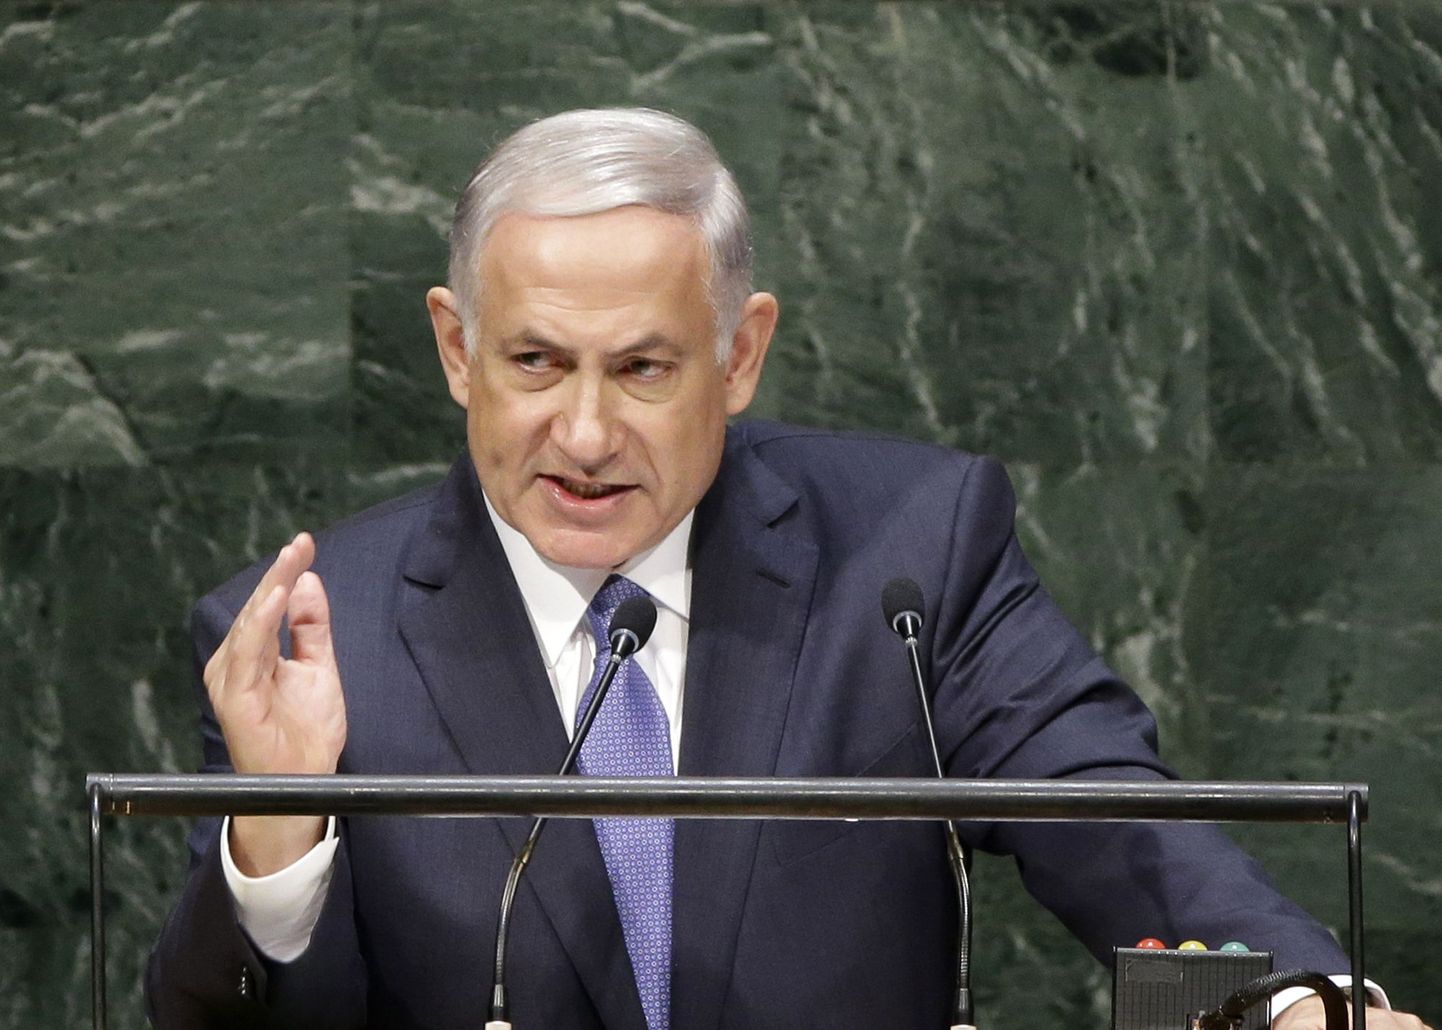 Benjamin Netanyahu, Prime Minister of Israel, speaks during the 69th session of the United Nations General Assembly at U.N. headquarters, Monday, Sept. 29, 2014. (AP Photo/Seth Wenig) / TT / kod 436